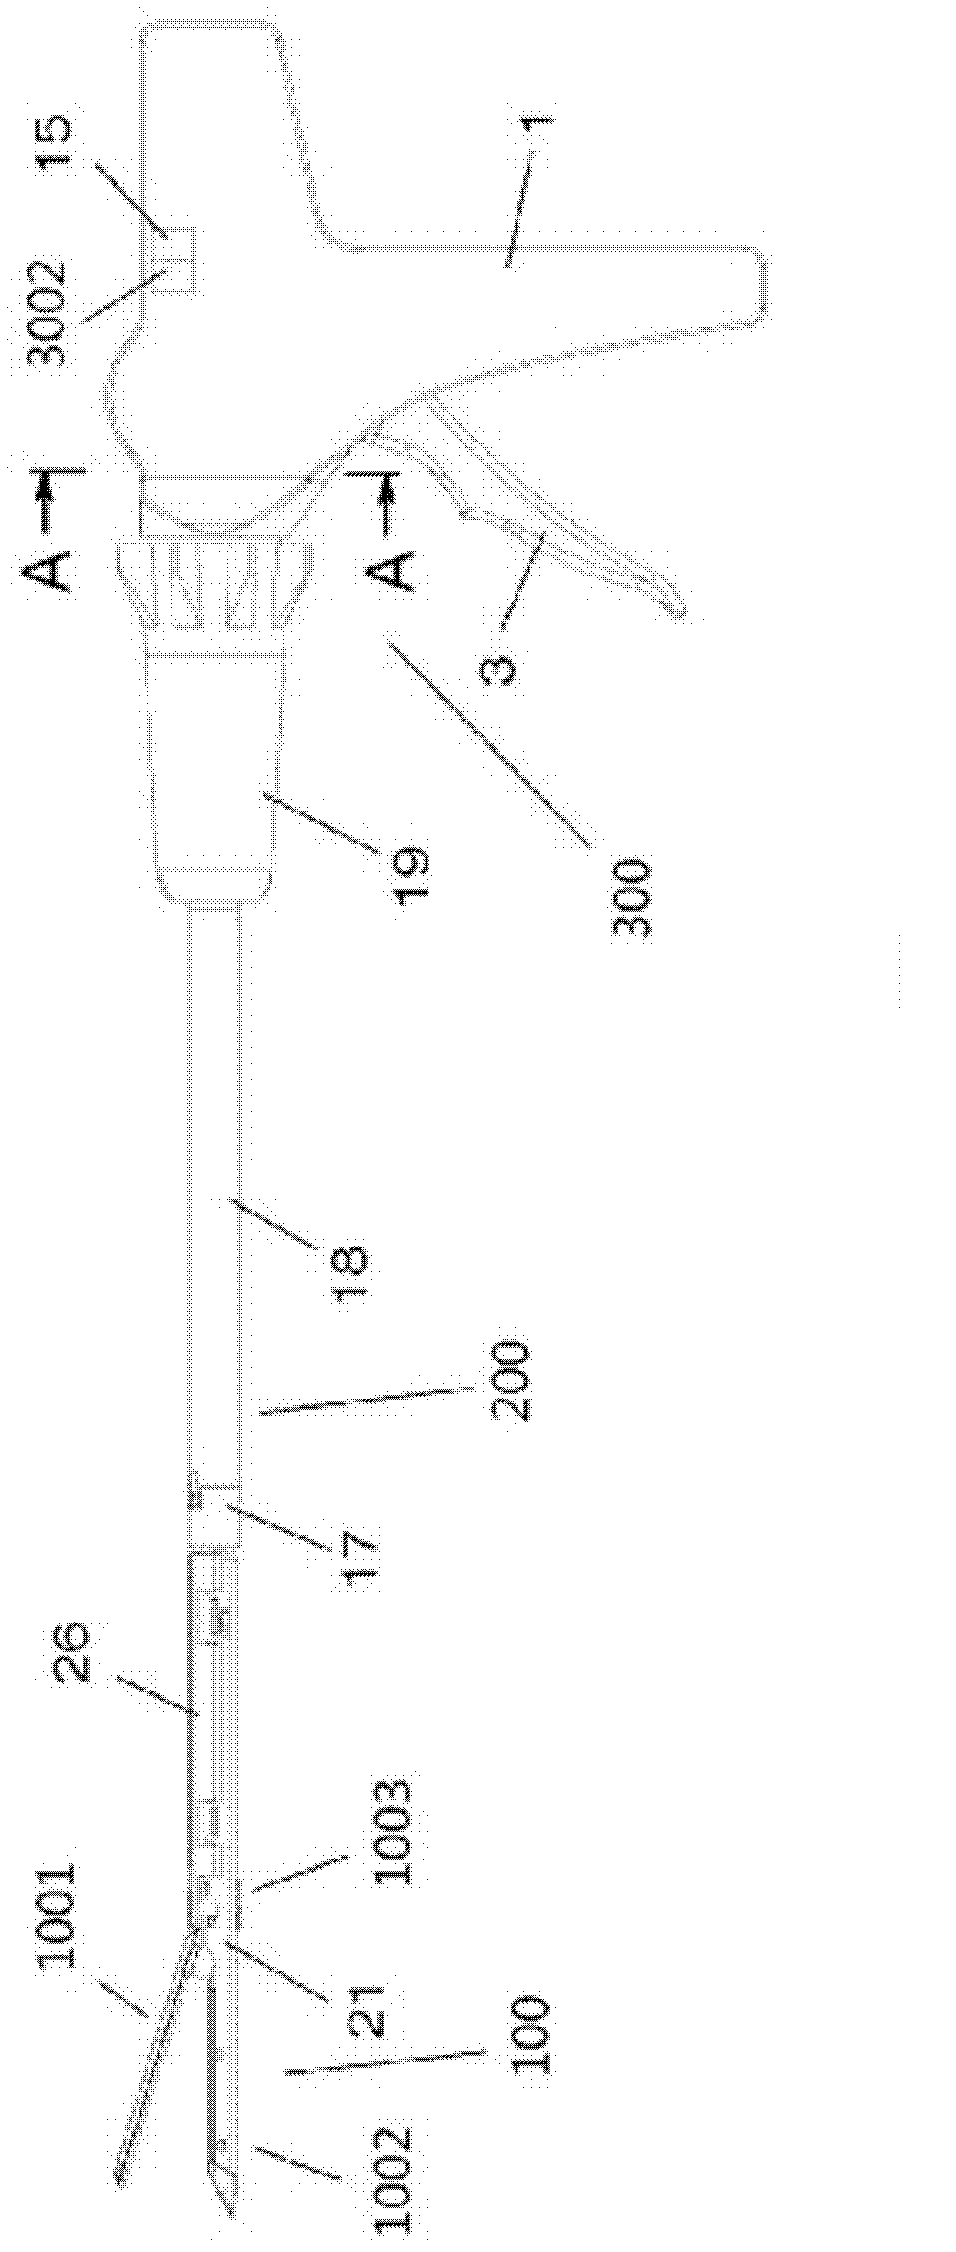 Control device for surgical instrument